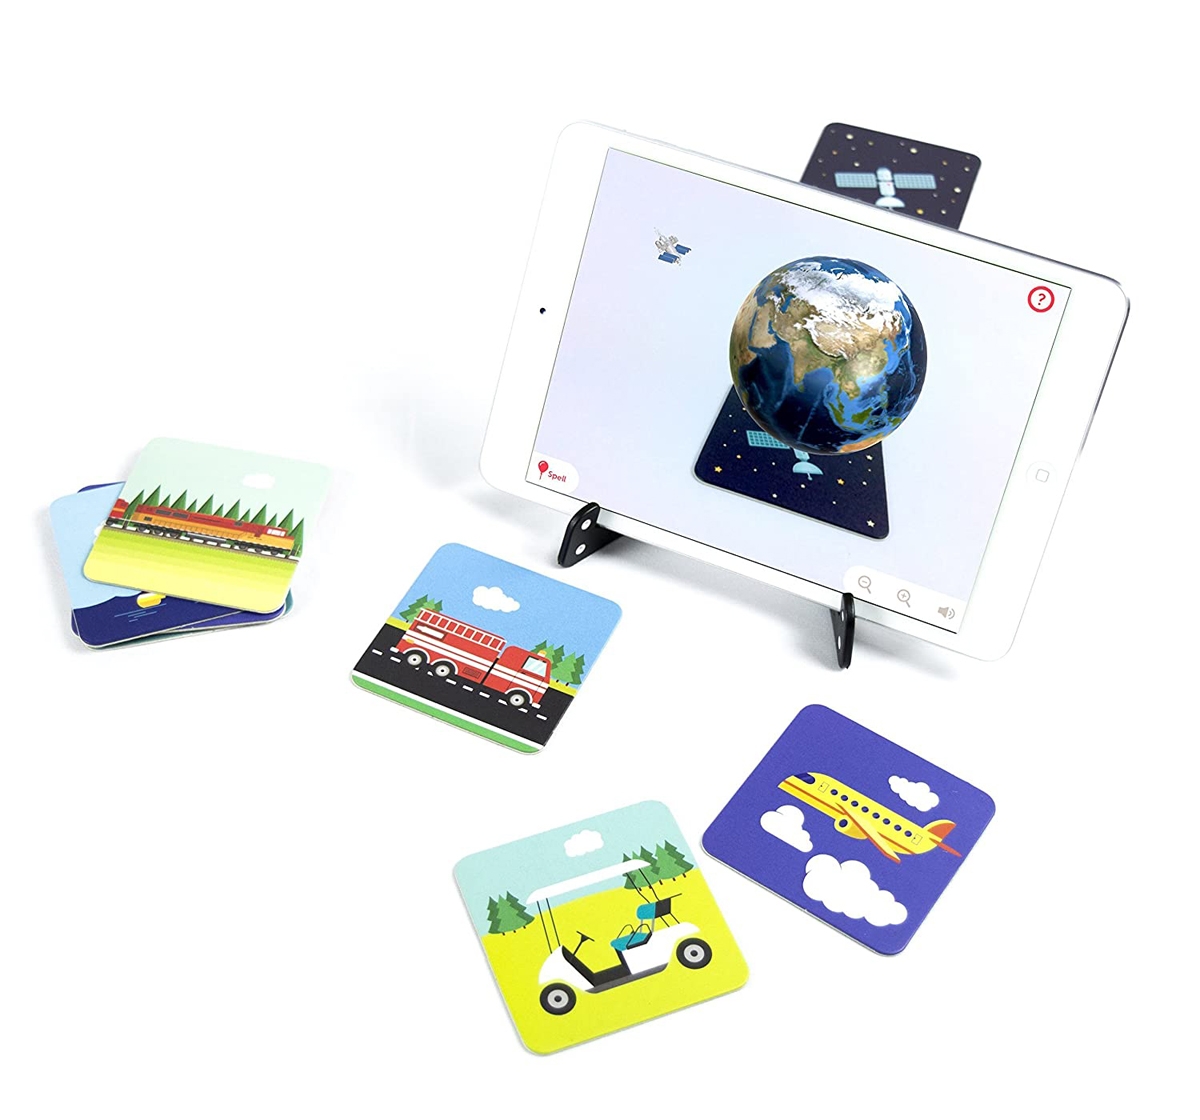 Playshifu | Playshifu Travel Augmented Reality Learning Games - Ios & Android (60 Vehicle Cards) Science Kits for Kids age 24M+  2